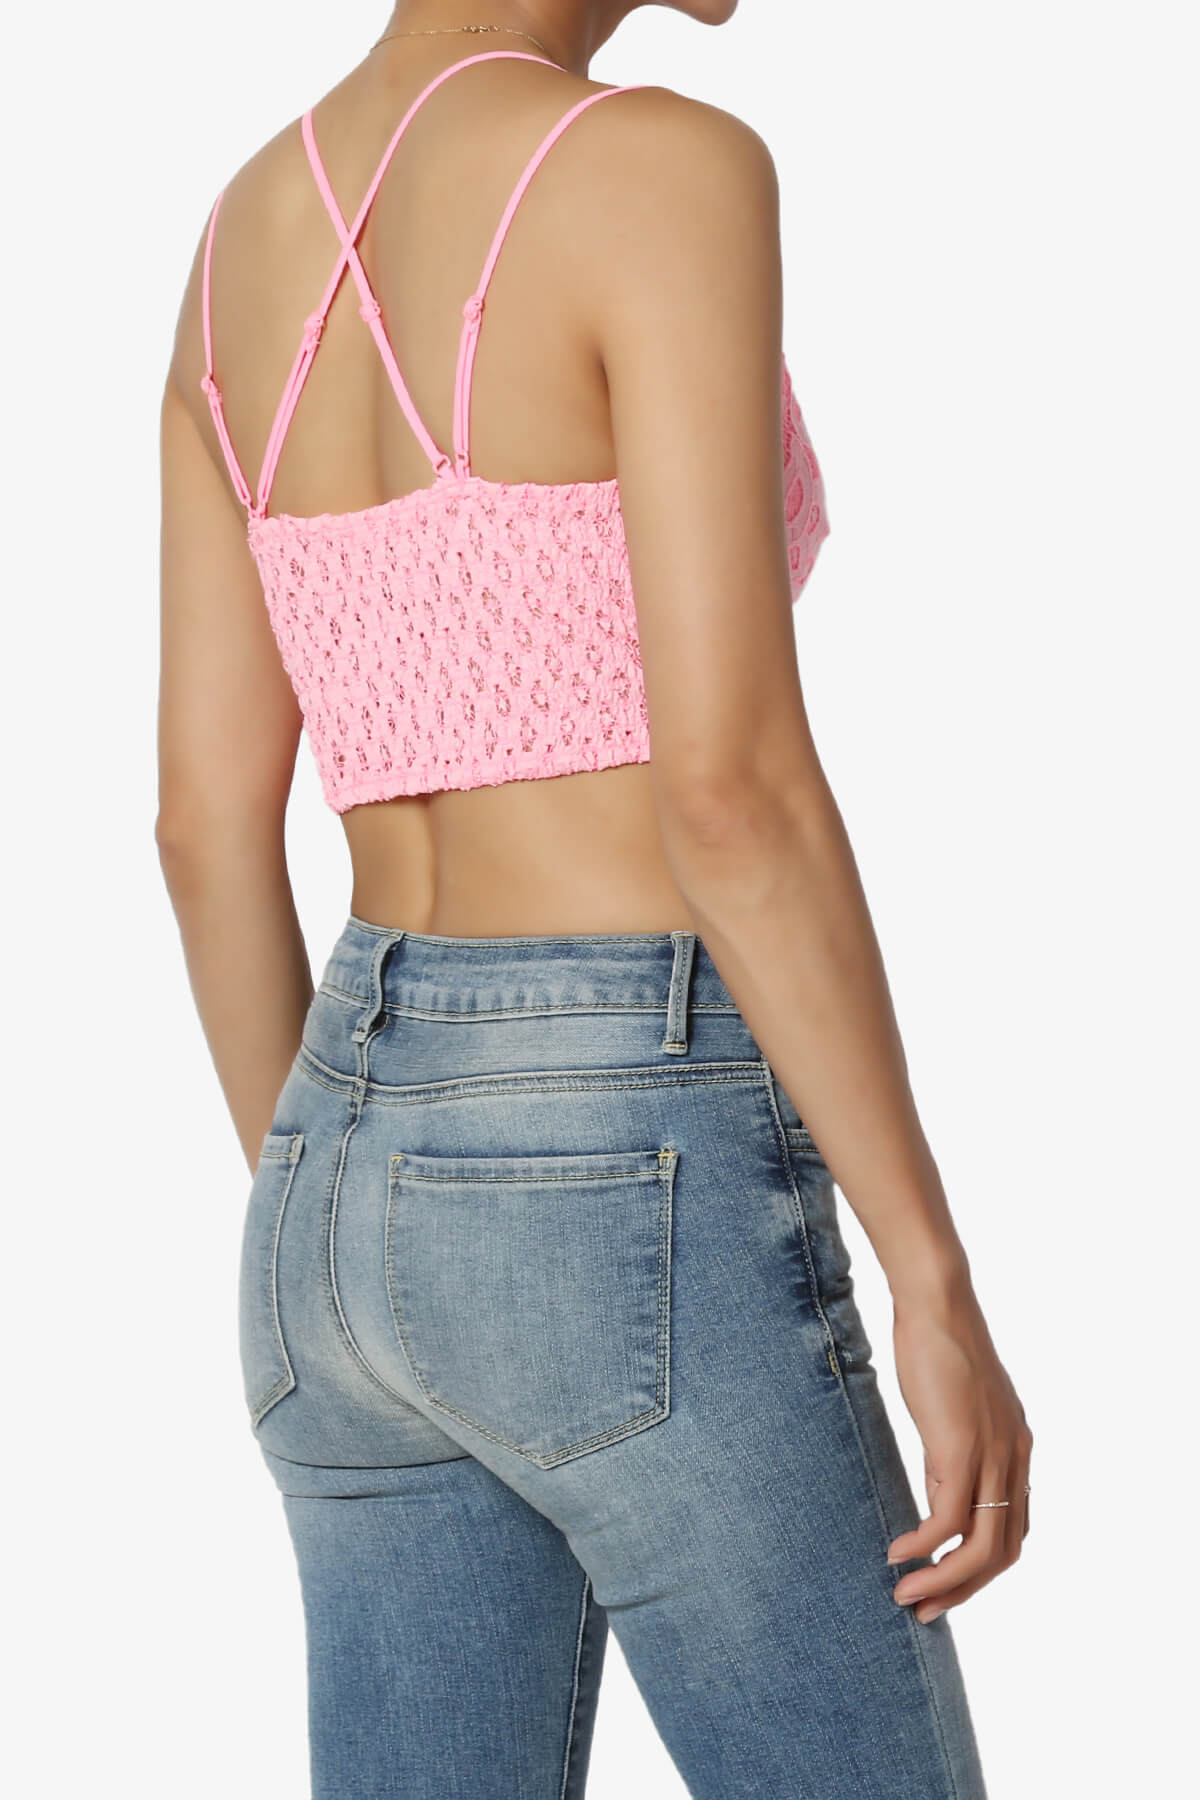 Load image into Gallery viewer, Adella Crochet Lace Bralette BRIGHT PINK_4
